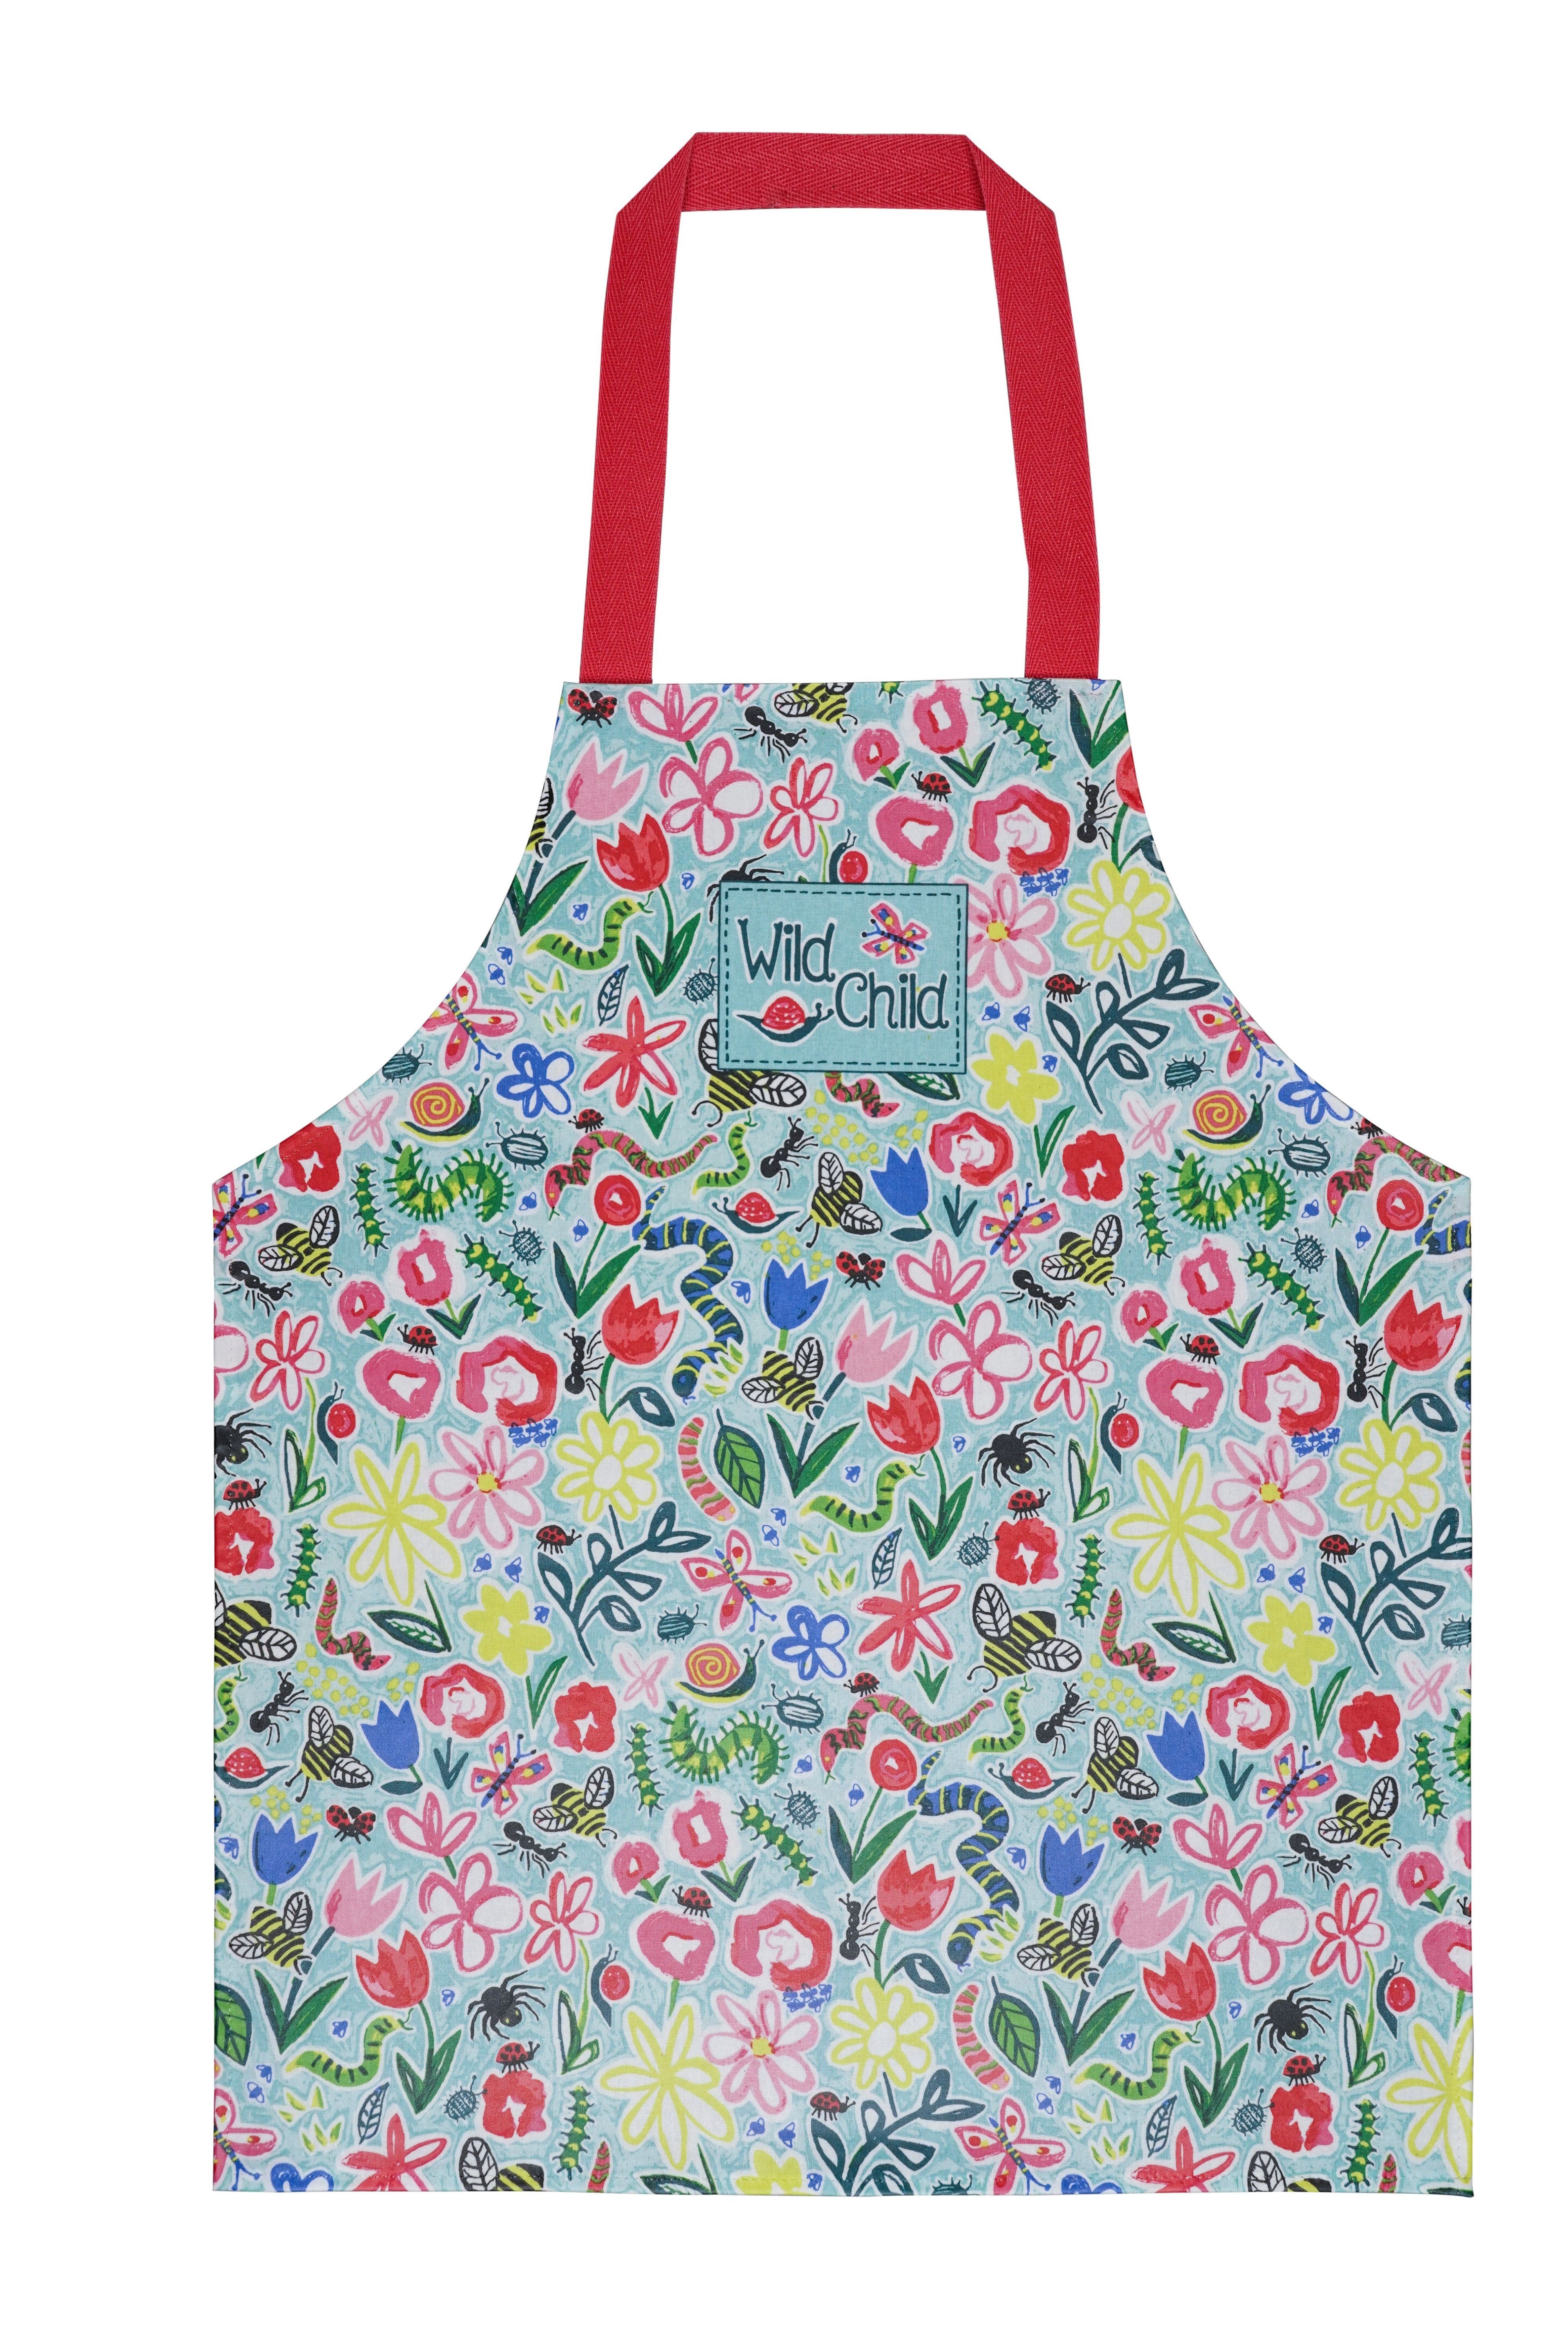 Ulster Weavers Born To Be Wild Child's PVC Apron